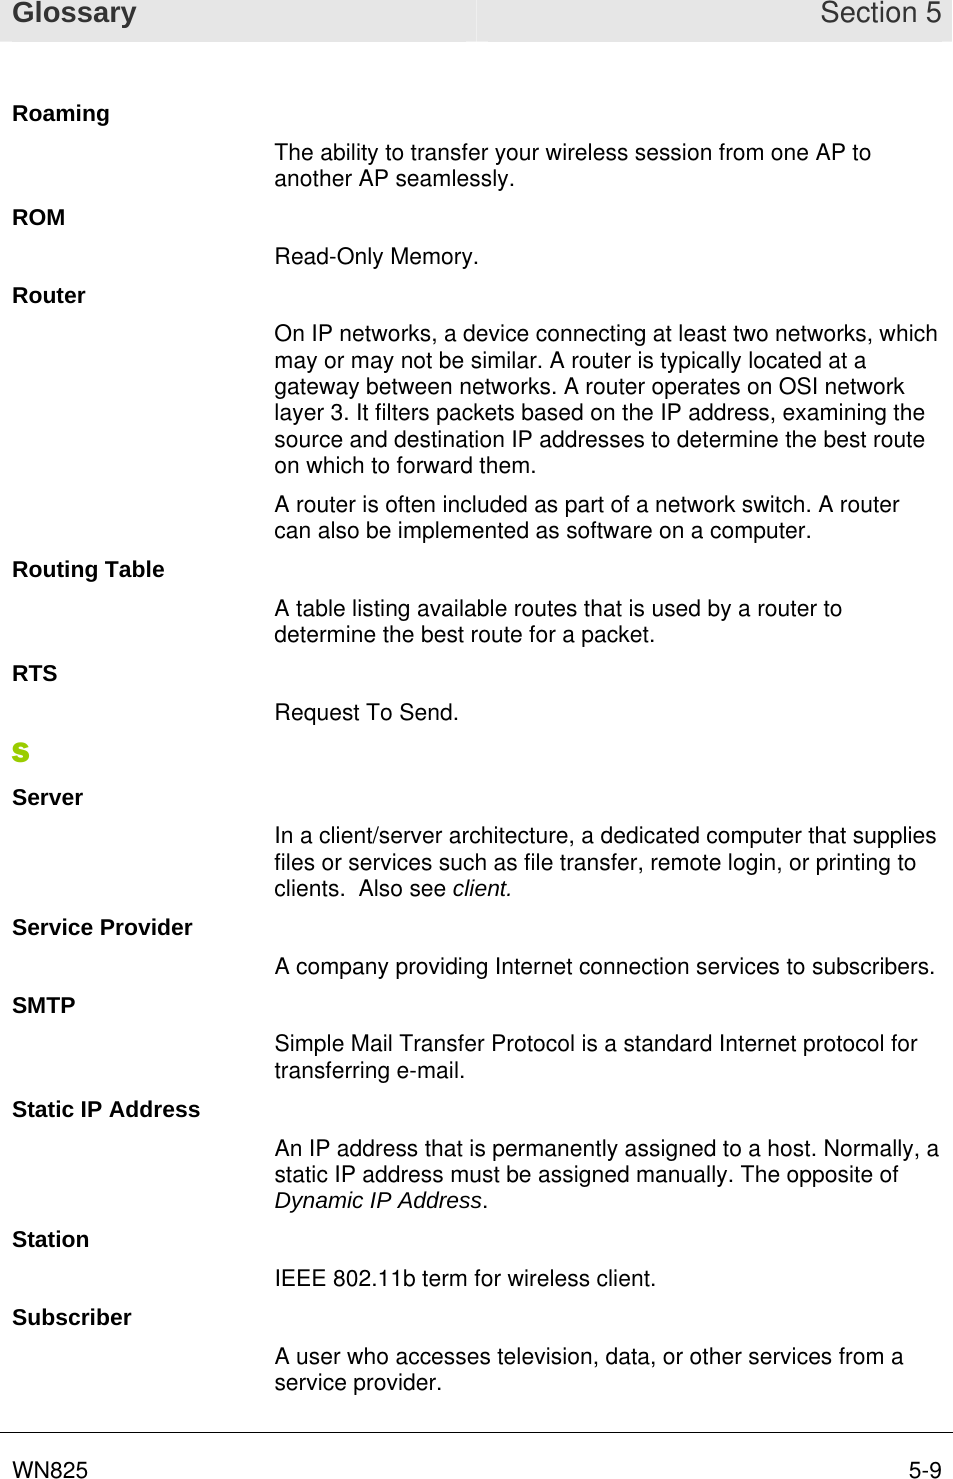 Glossary Section 5 WN825  5-9Roaming The ability to transfer your wireless session from one AP to another AP seamlessly. ROM Read-Only Memory. Router On IP networks, a device connecting at least two networks, which may or may not be similar. A router is typically located at a gateway between networks. A router operates on OSI network layer 3. It filters packets based on the IP address, examining the source and destination IP addresses to determine the best route on which to forward them.  A router is often included as part of a network switch. A router can also be implemented as software on a computer. Routing Table A table listing available routes that is used by a router to determine the best route for a packet. RTS Request To Send. S Server In a client/server architecture, a dedicated computer that supplies files or services such as file transfer, remote login, or printing to clients.  Also see client. Service Provider A company providing Internet connection services to subscribers. SMTP Simple Mail Transfer Protocol is a standard Internet protocol for transferring e-mail. Static IP Address An IP address that is permanently assigned to a host. Normally, a static IP address must be assigned manually. The opposite of Dynamic IP Address. Station IEEE 802.11b term for wireless client. Subscriber A user who accesses television, data, or other services from a service provider.  